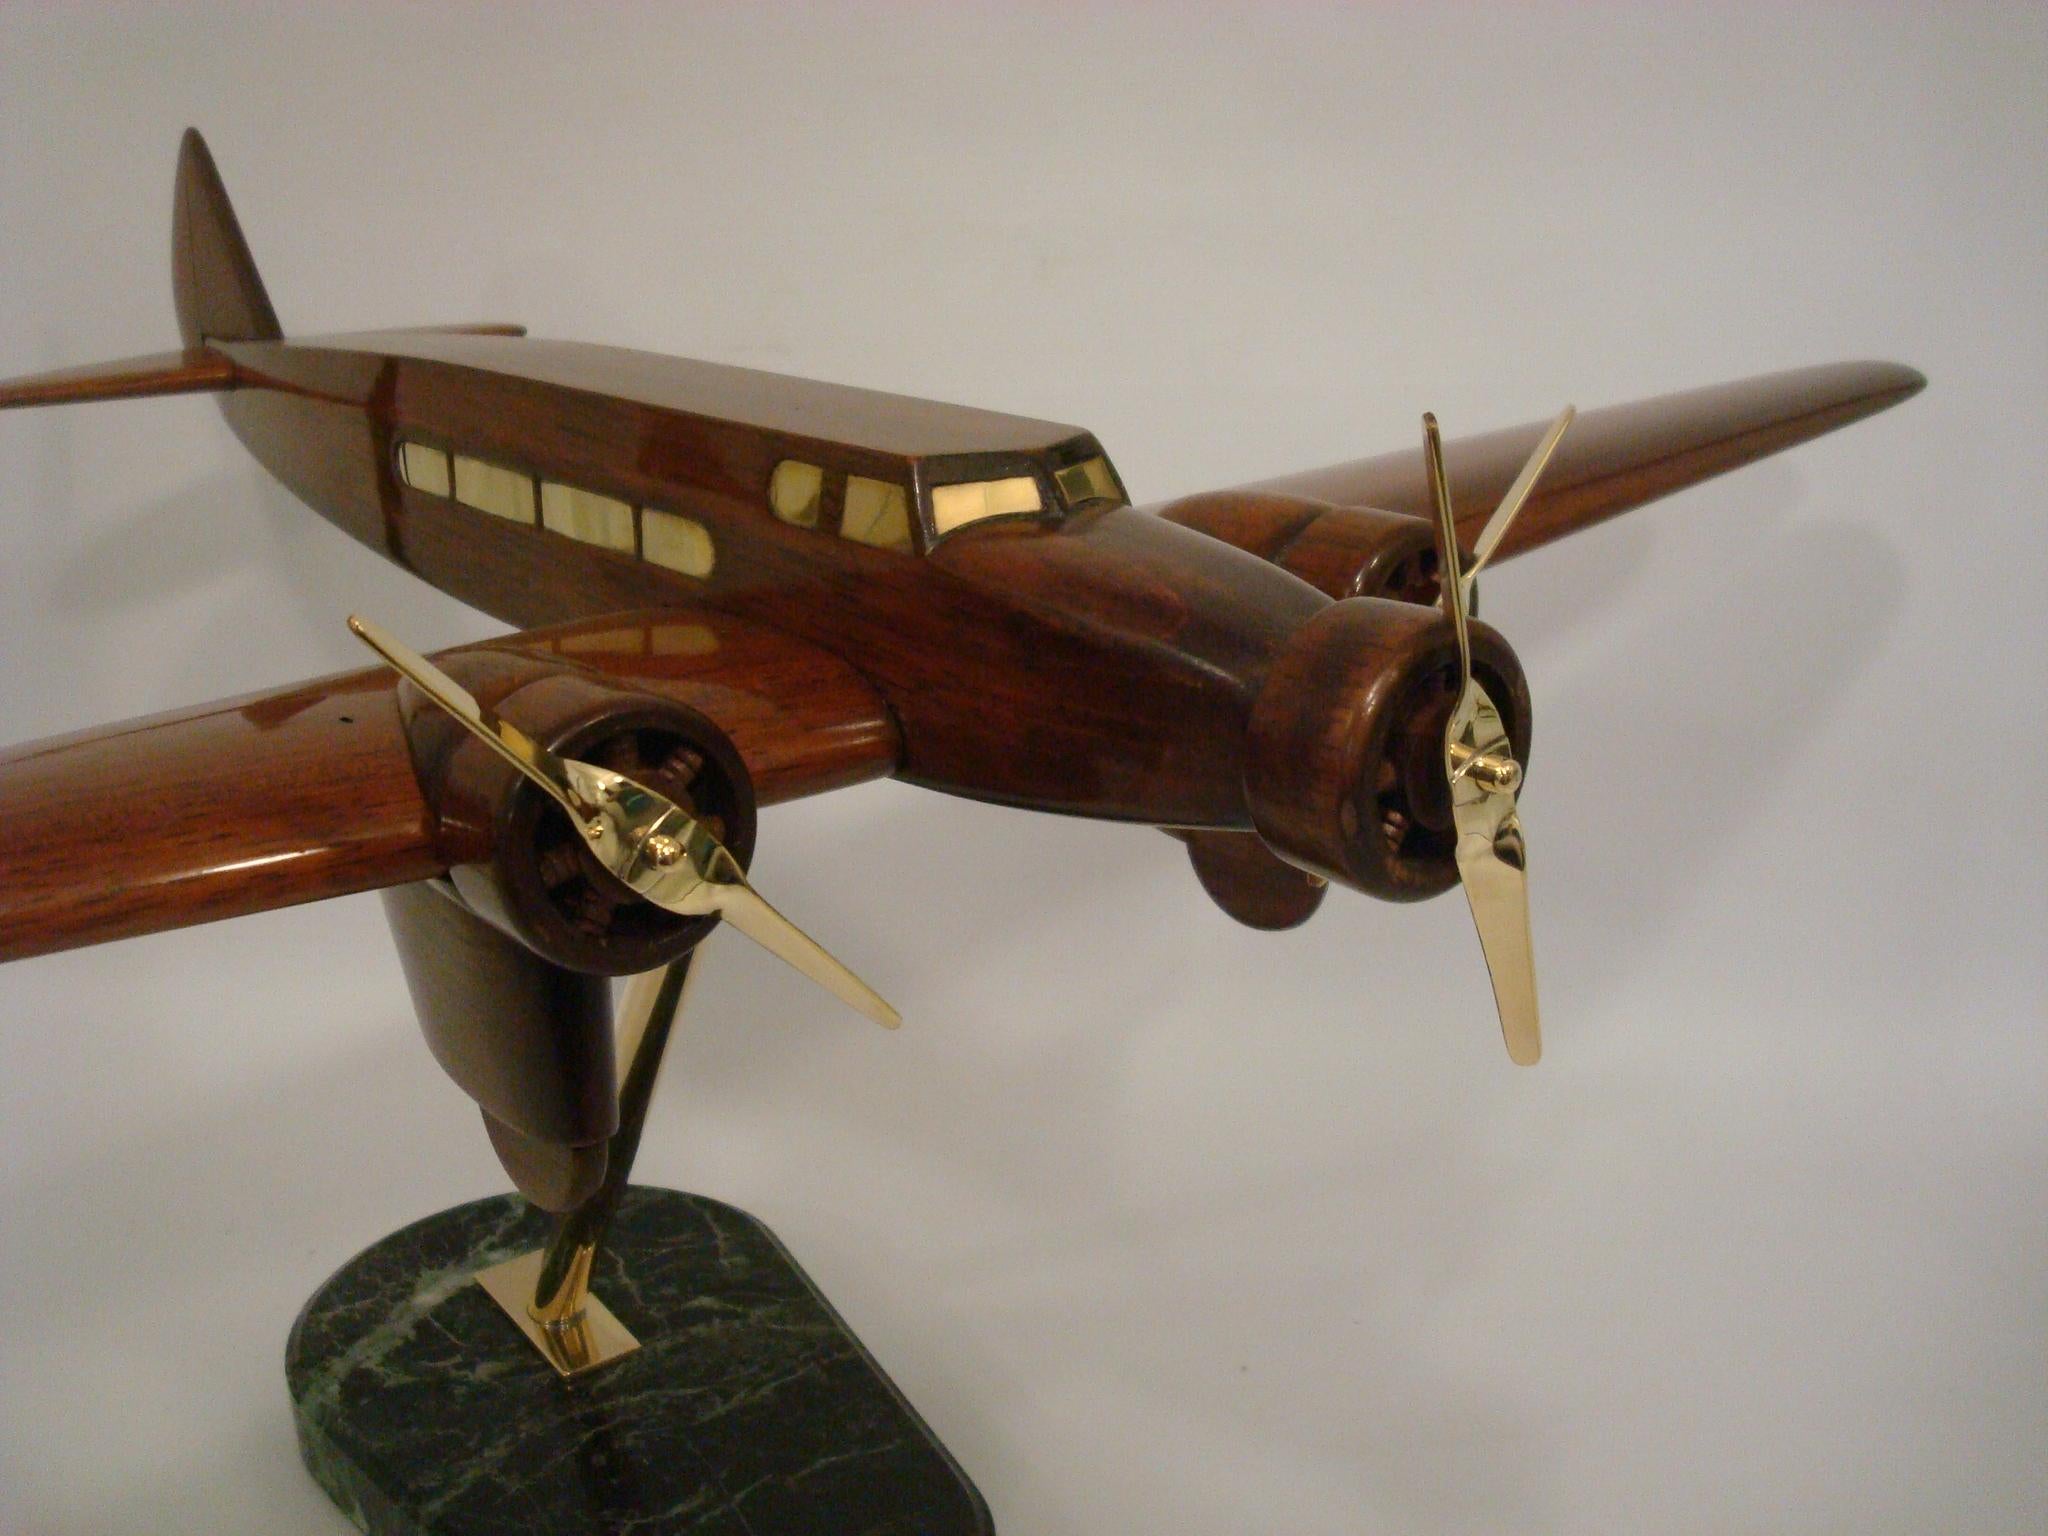 Art Deco Dewoitine Wooden Counters Desk Model Airplane 1930s French.
The Dewoitine  was a Art Deco 1930s French eight-passenger airliner built by Dewoitine.
The Airplane was an all-metal cantilever low-wing monoplane. The pilot and co-pilot were